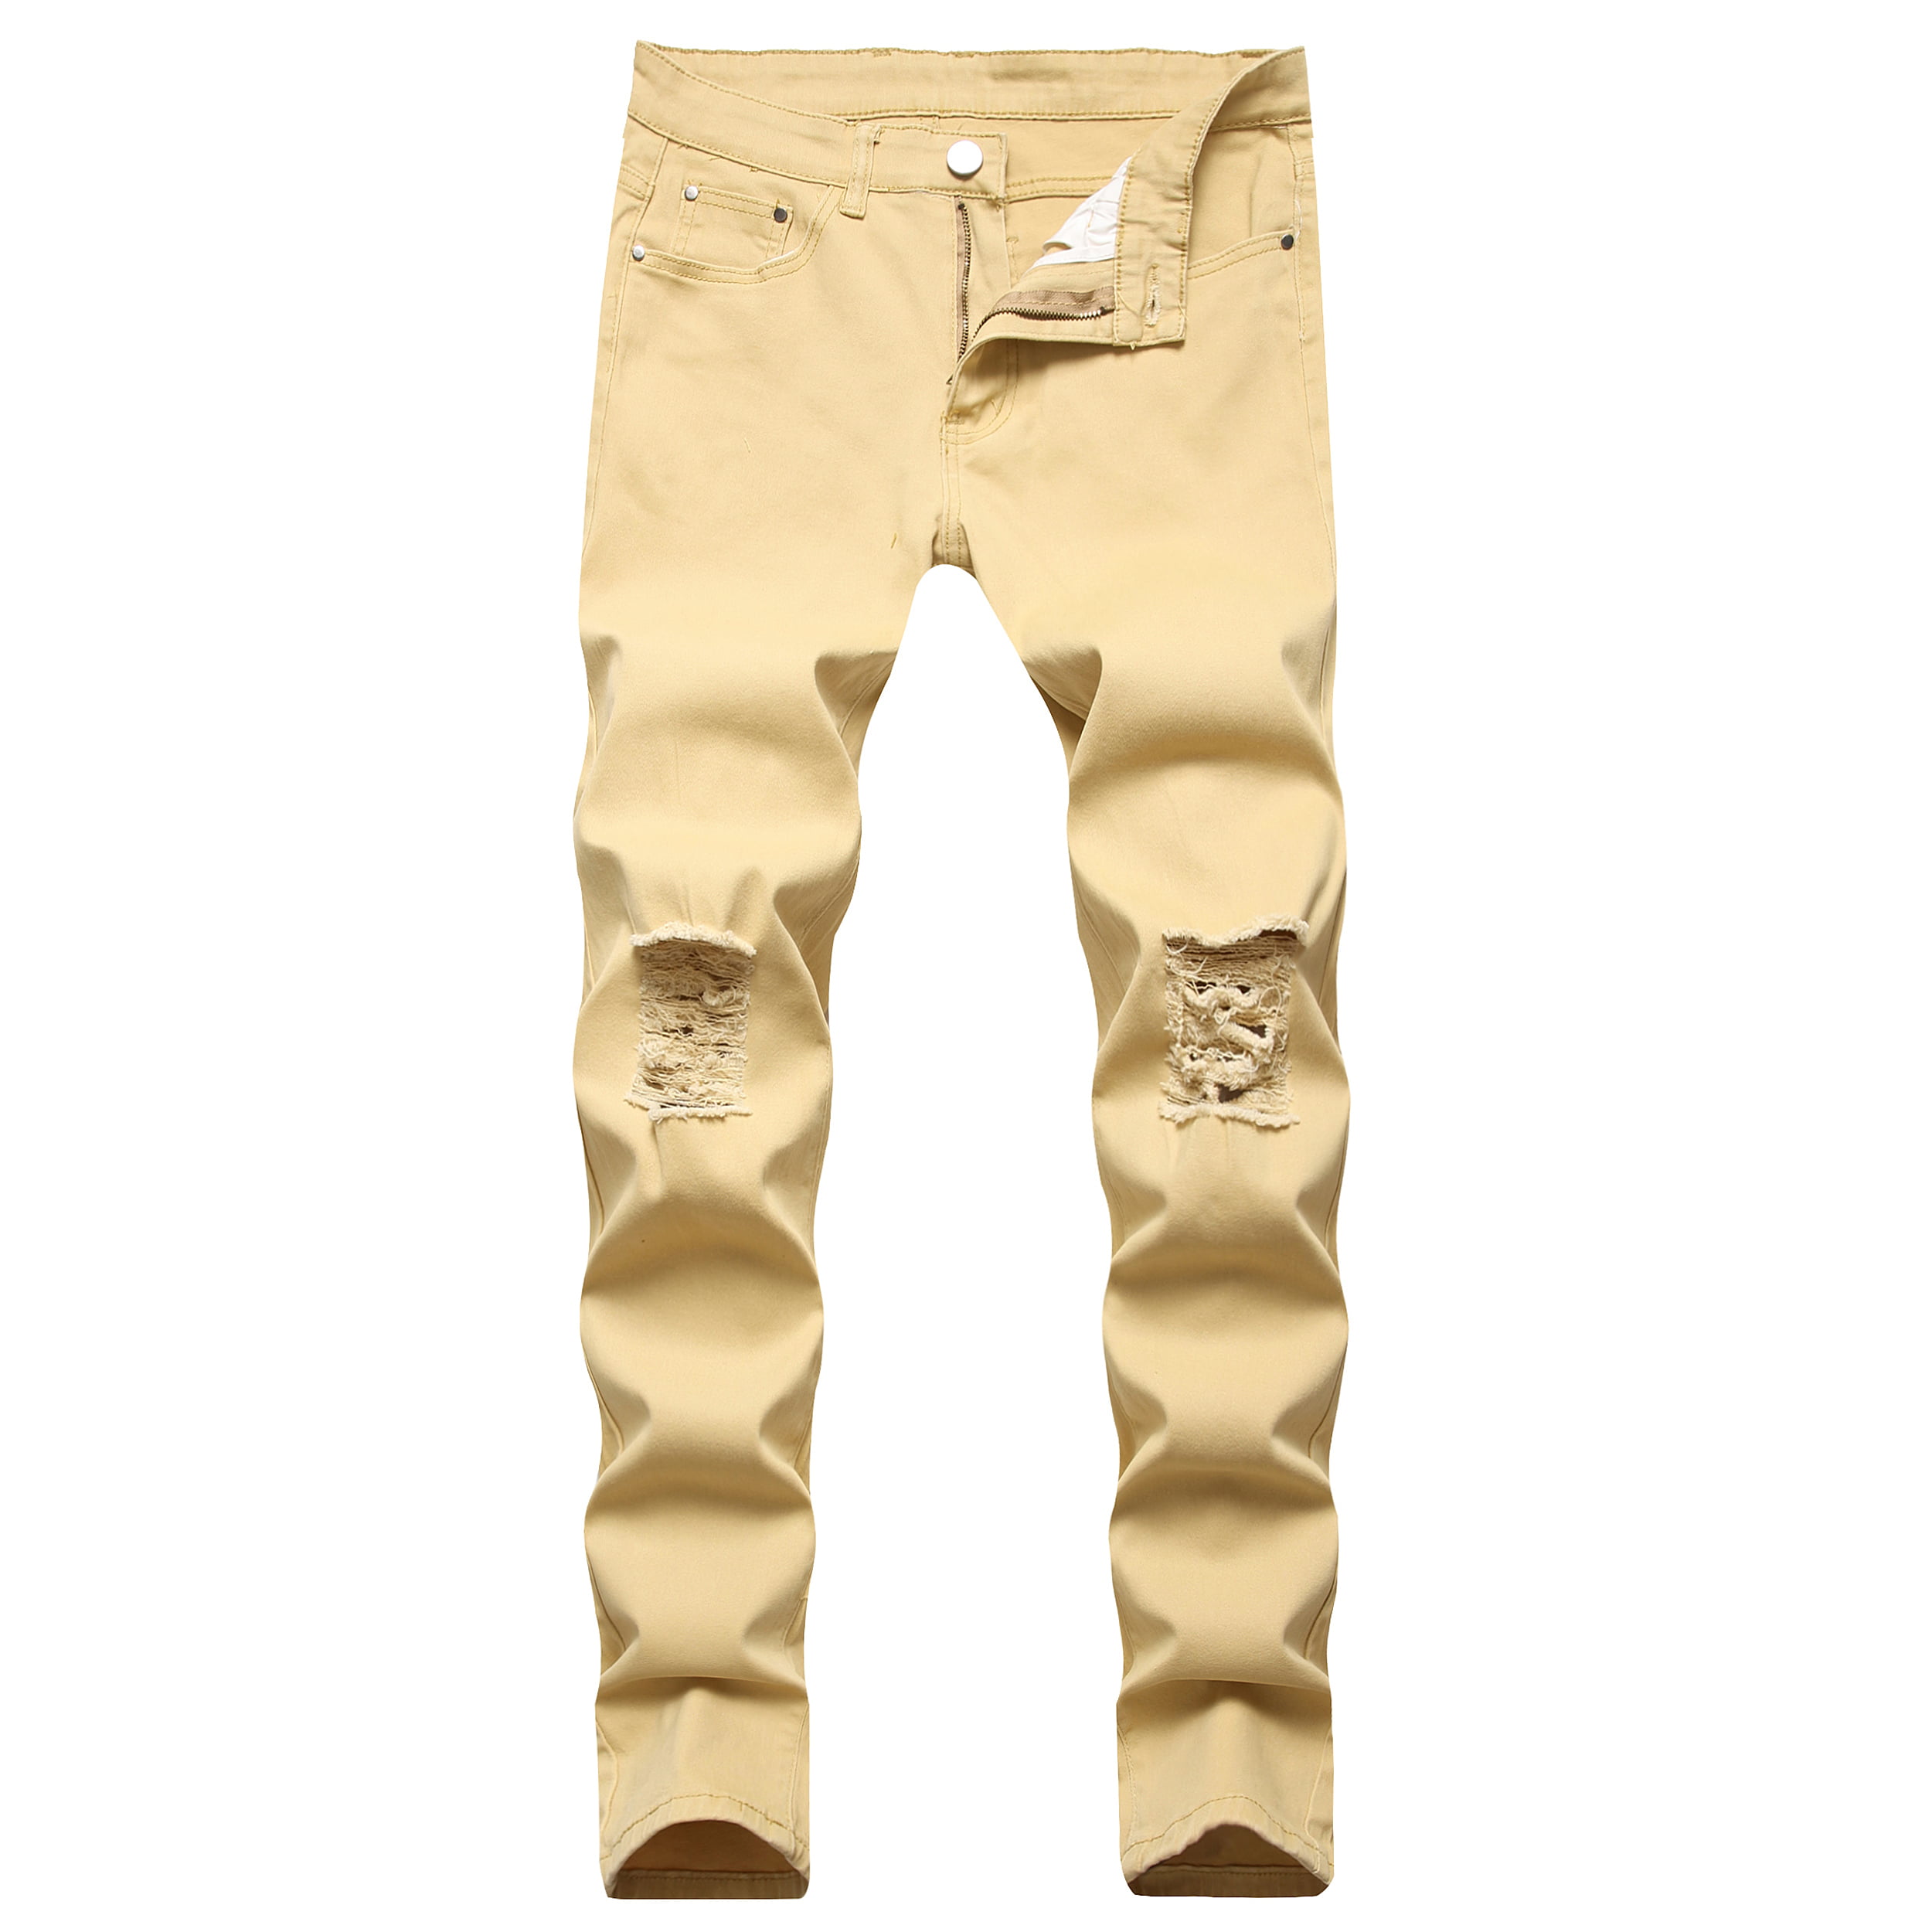 COUTEXYI Men' s Ripped Trousers,Solid Color High Waist Pants Pants for Spring Fall, Green/Khaki/Black/White Walmart.com